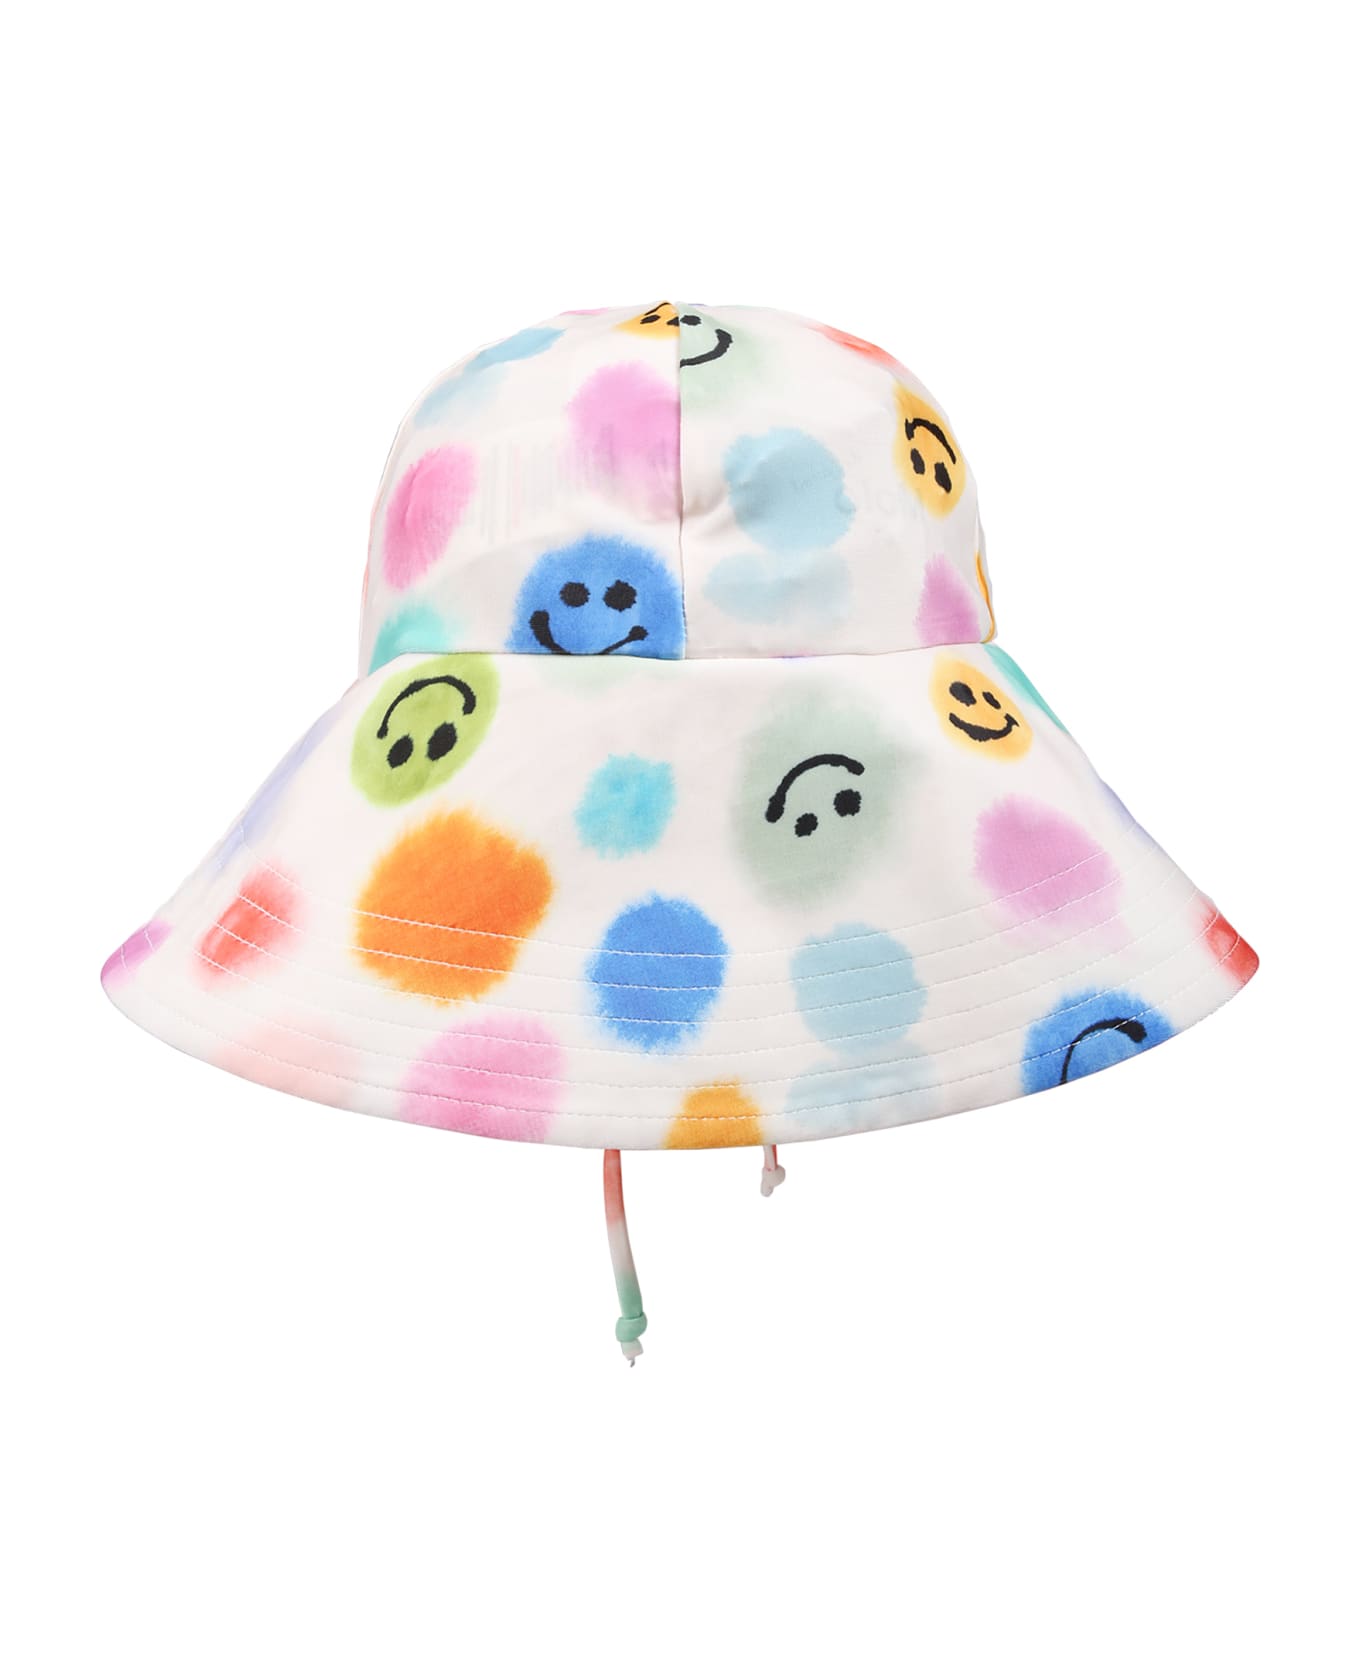 Molo White Cloche For Kids With Smiley - Multicolor アクセサリー＆ギフト